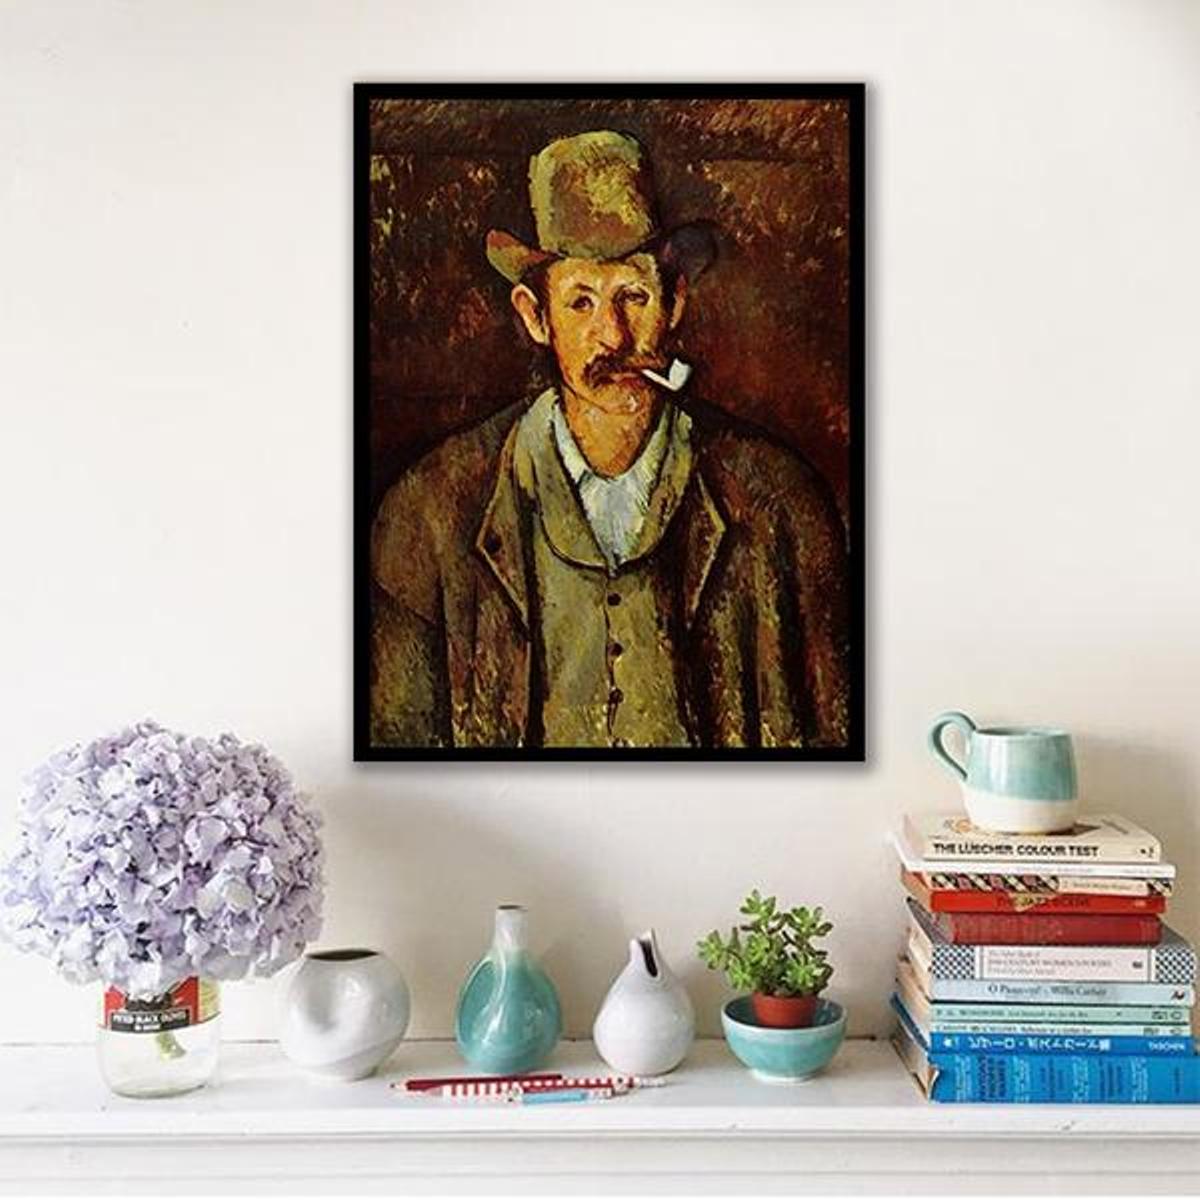 Man with Pipe by Paul Cezanne - Van-Go Paint-By-Number Kit